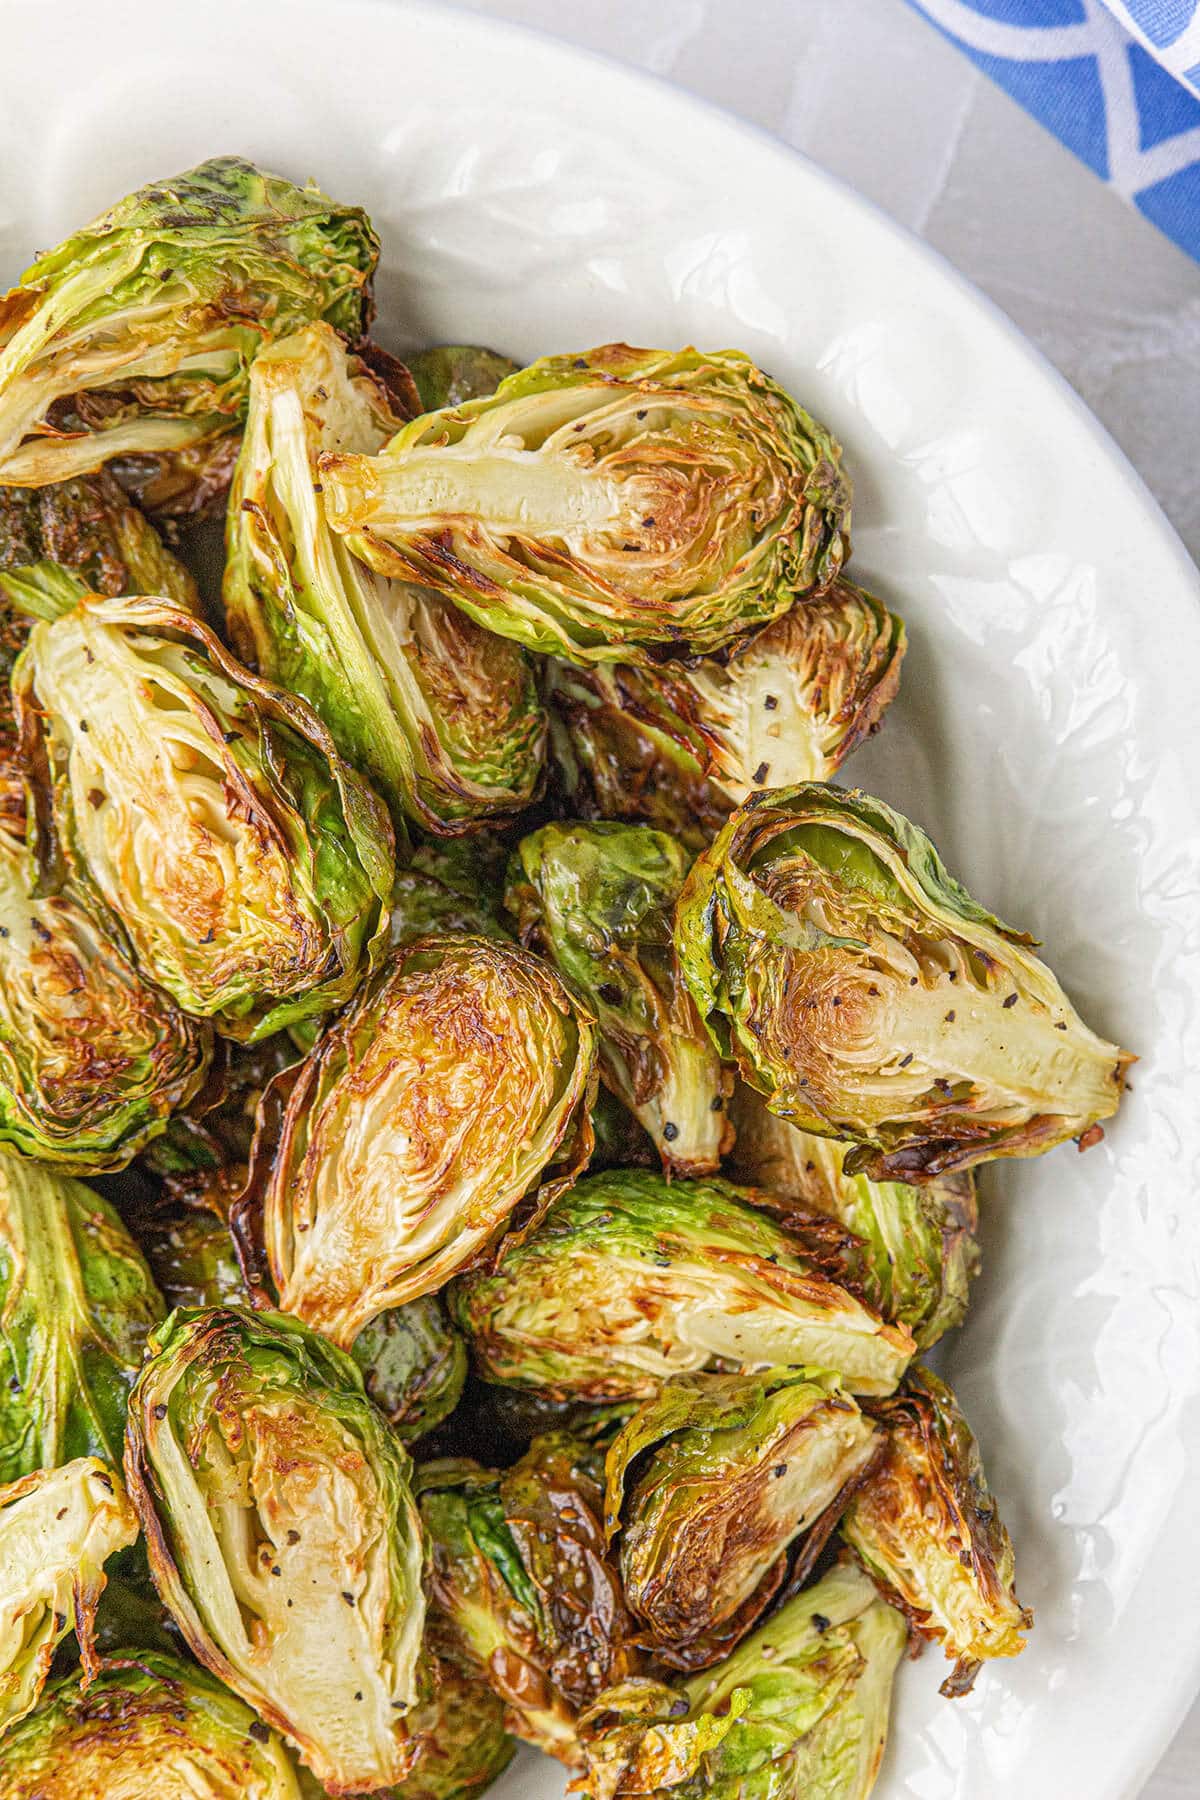 Caramelized fried brussels sprouts in bowl.